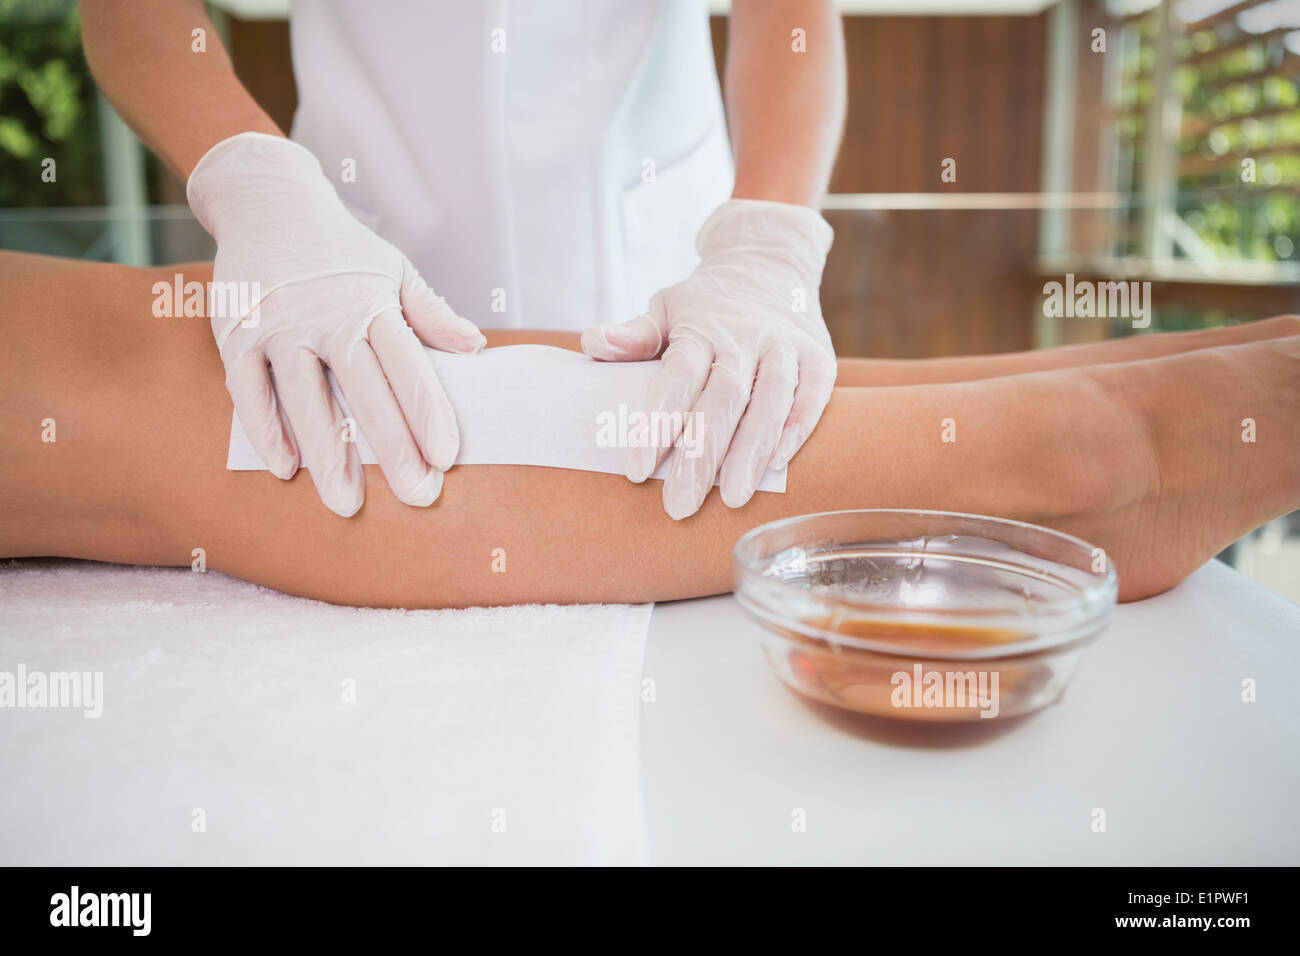 Woman getting her legs waxed by beauty therapist Stock Photo